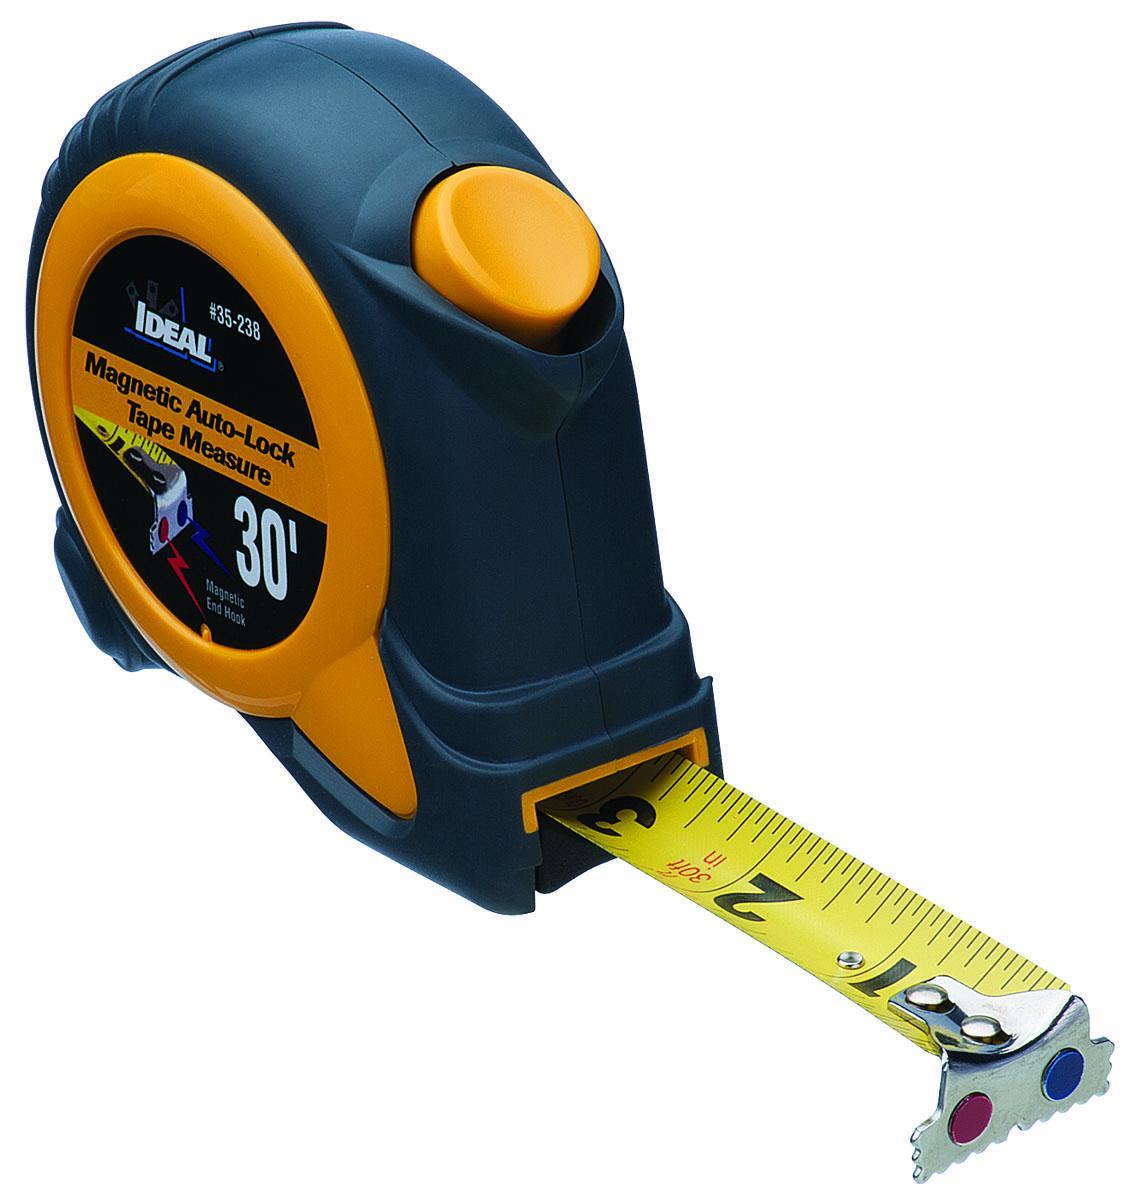 Klein Tools 86125 25' Single Hook Non-Magnetic Tape Measure